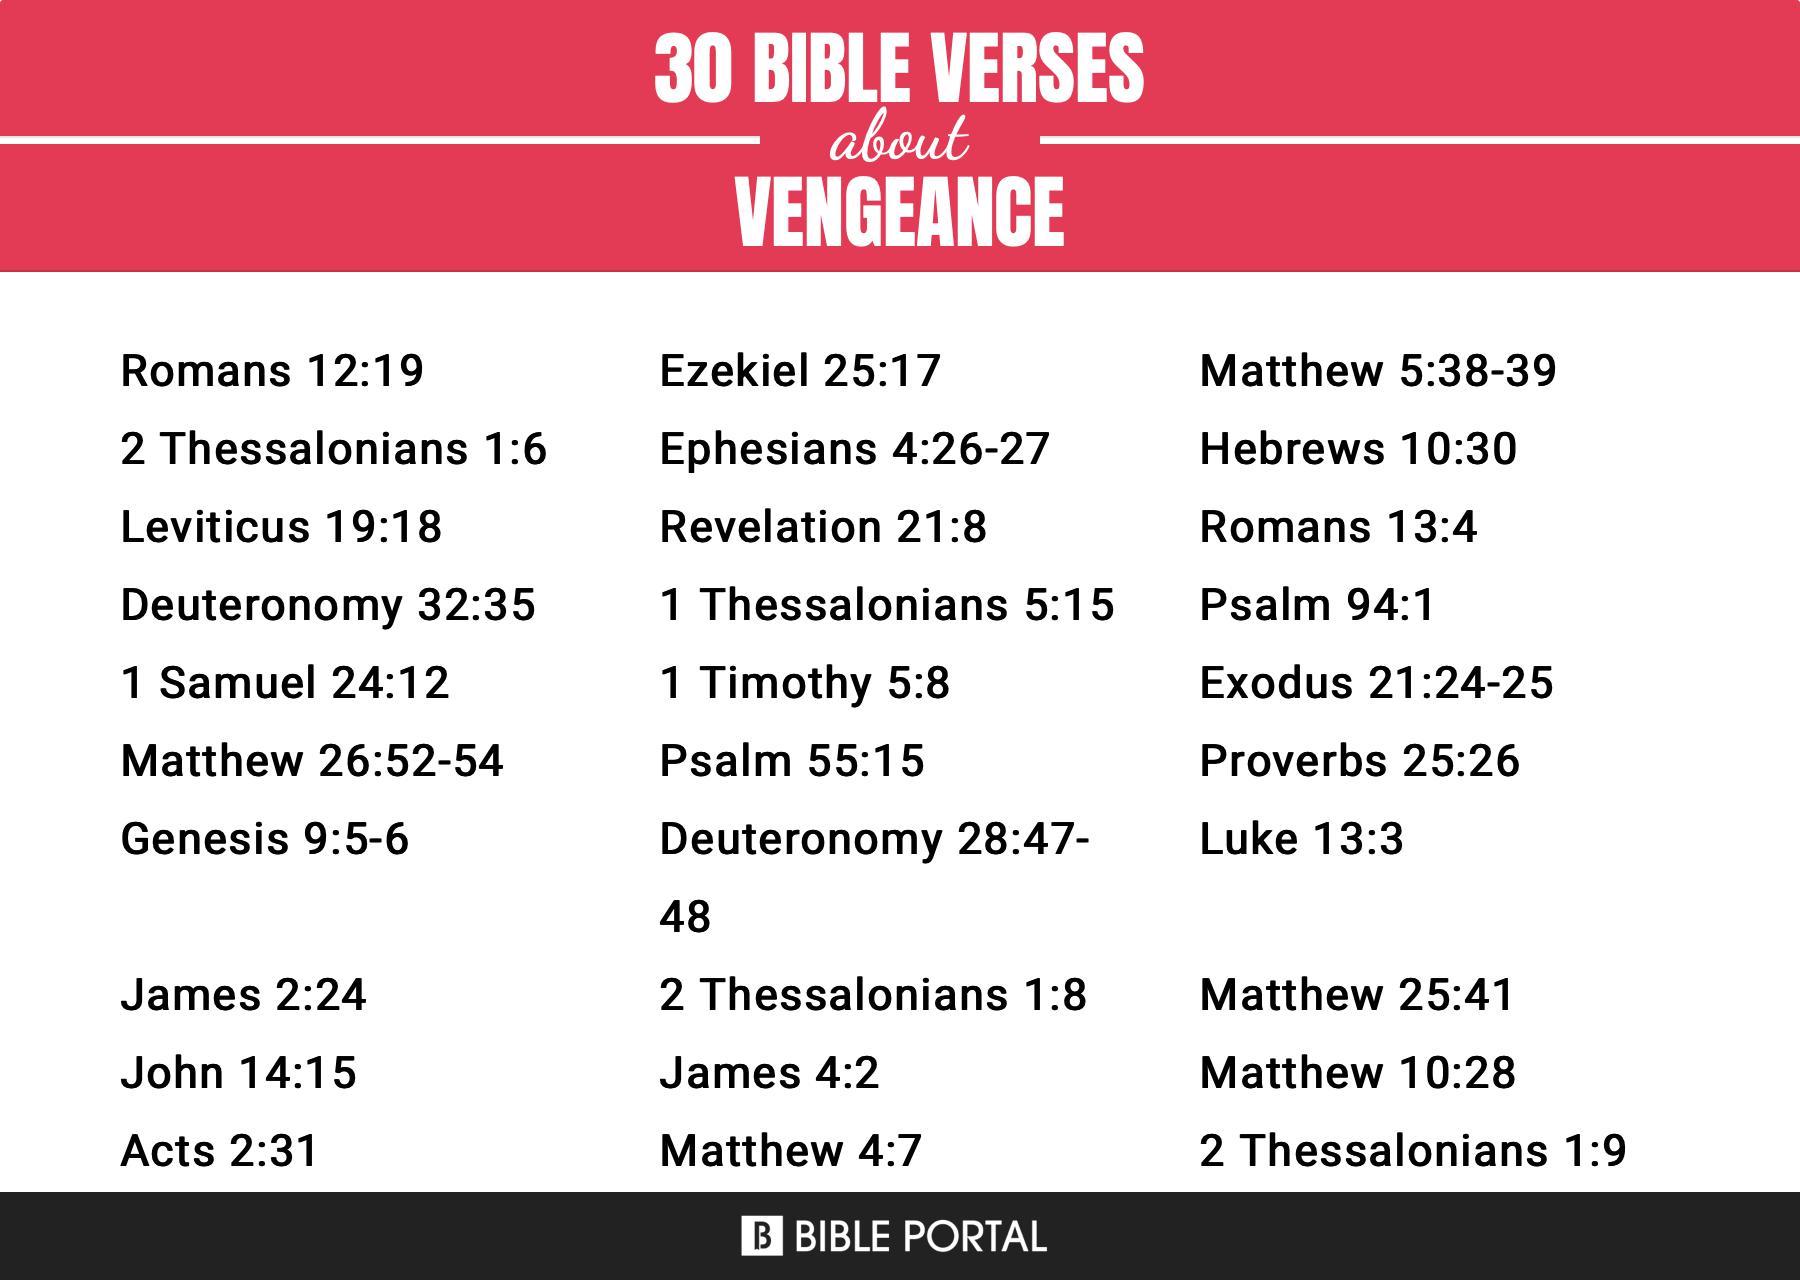 What Does the Bible Say about Vengeance?